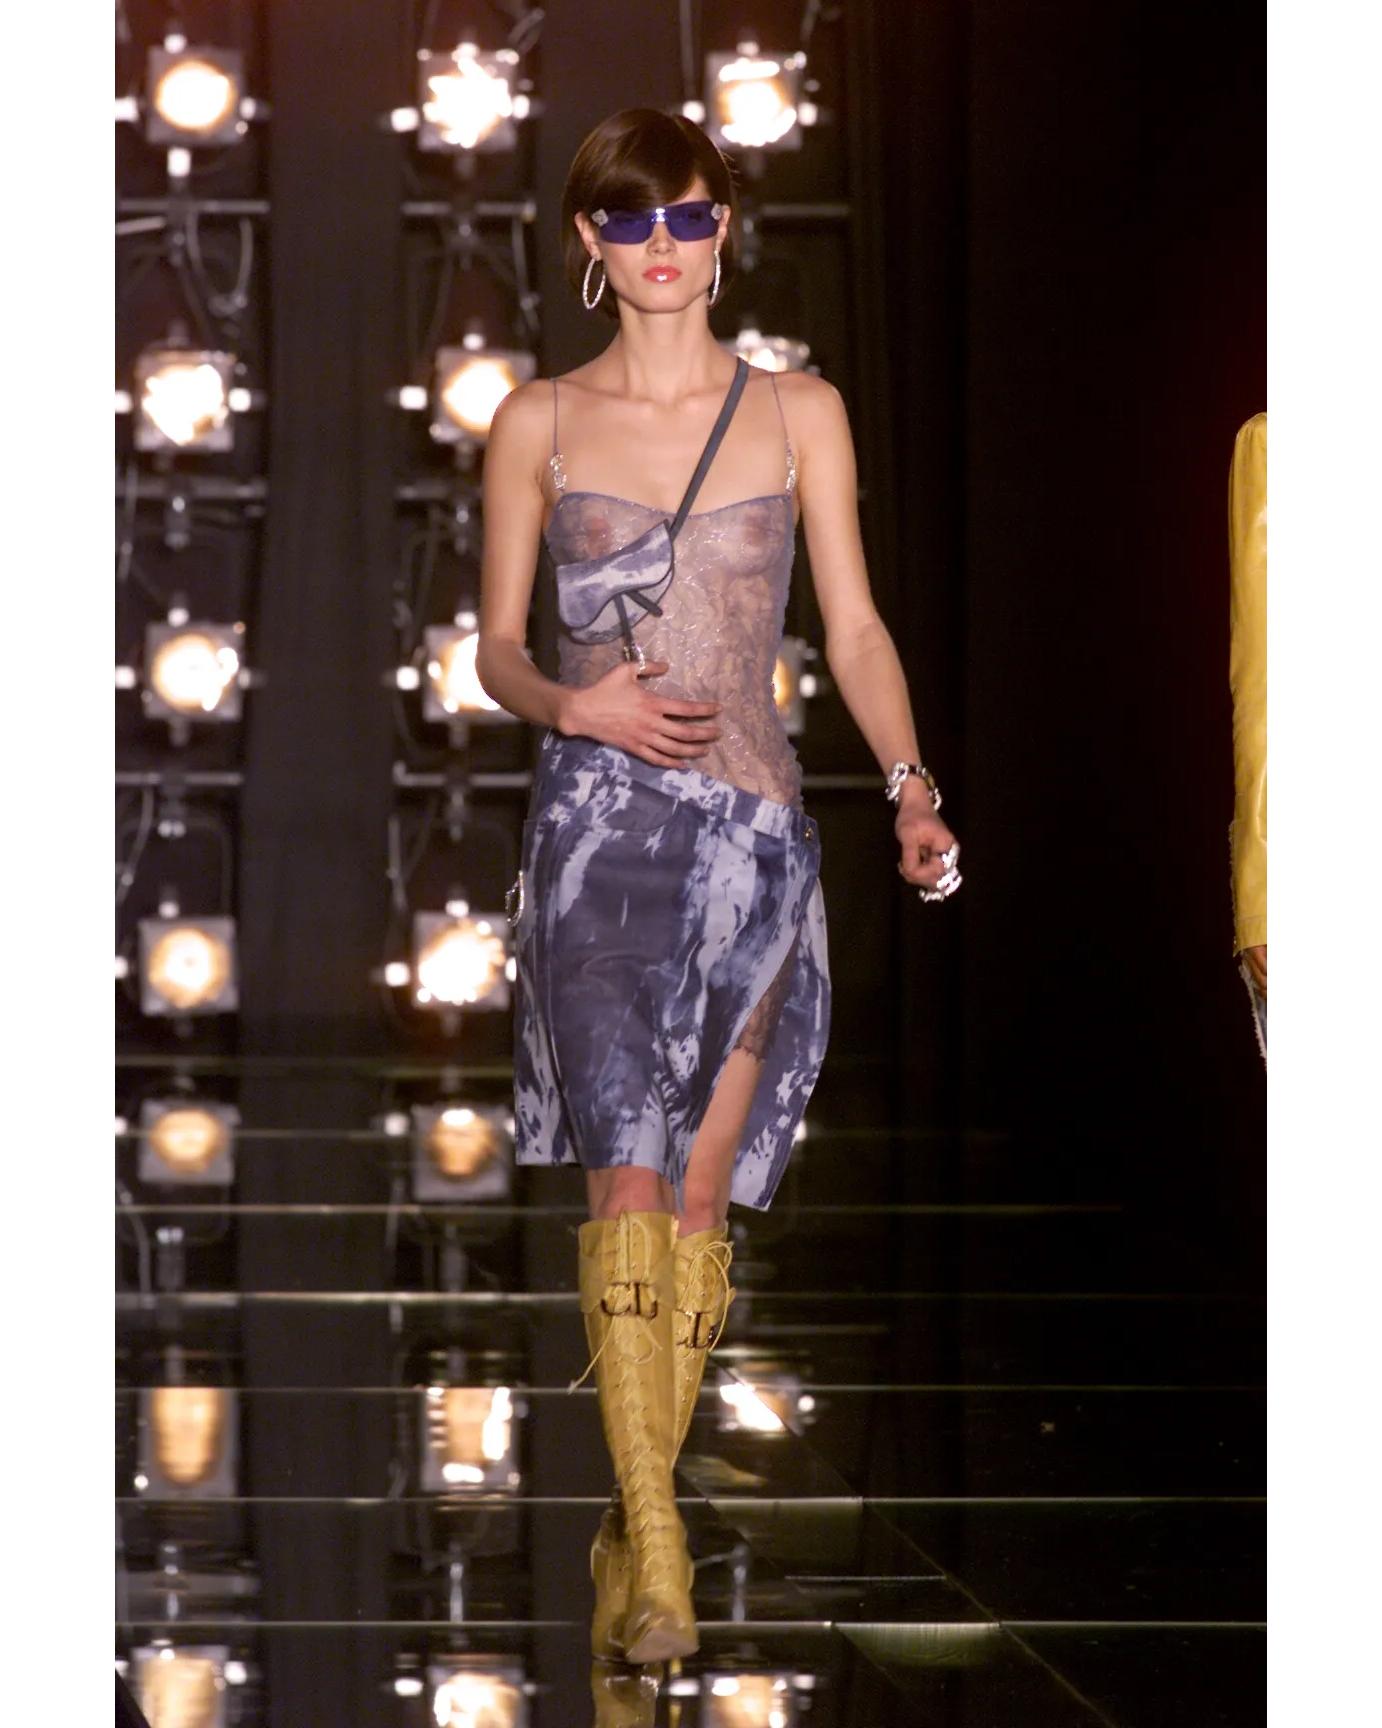 A/W 2000 Christian Dior by John Galliano denim tie-dye wrap skirt. Vibrant light blue and medium blue wash tie-dye patterned skirt with asymmetrical wrap structure. Interior button closure to create wrap effect, and five gold-tone stamped 'Christian